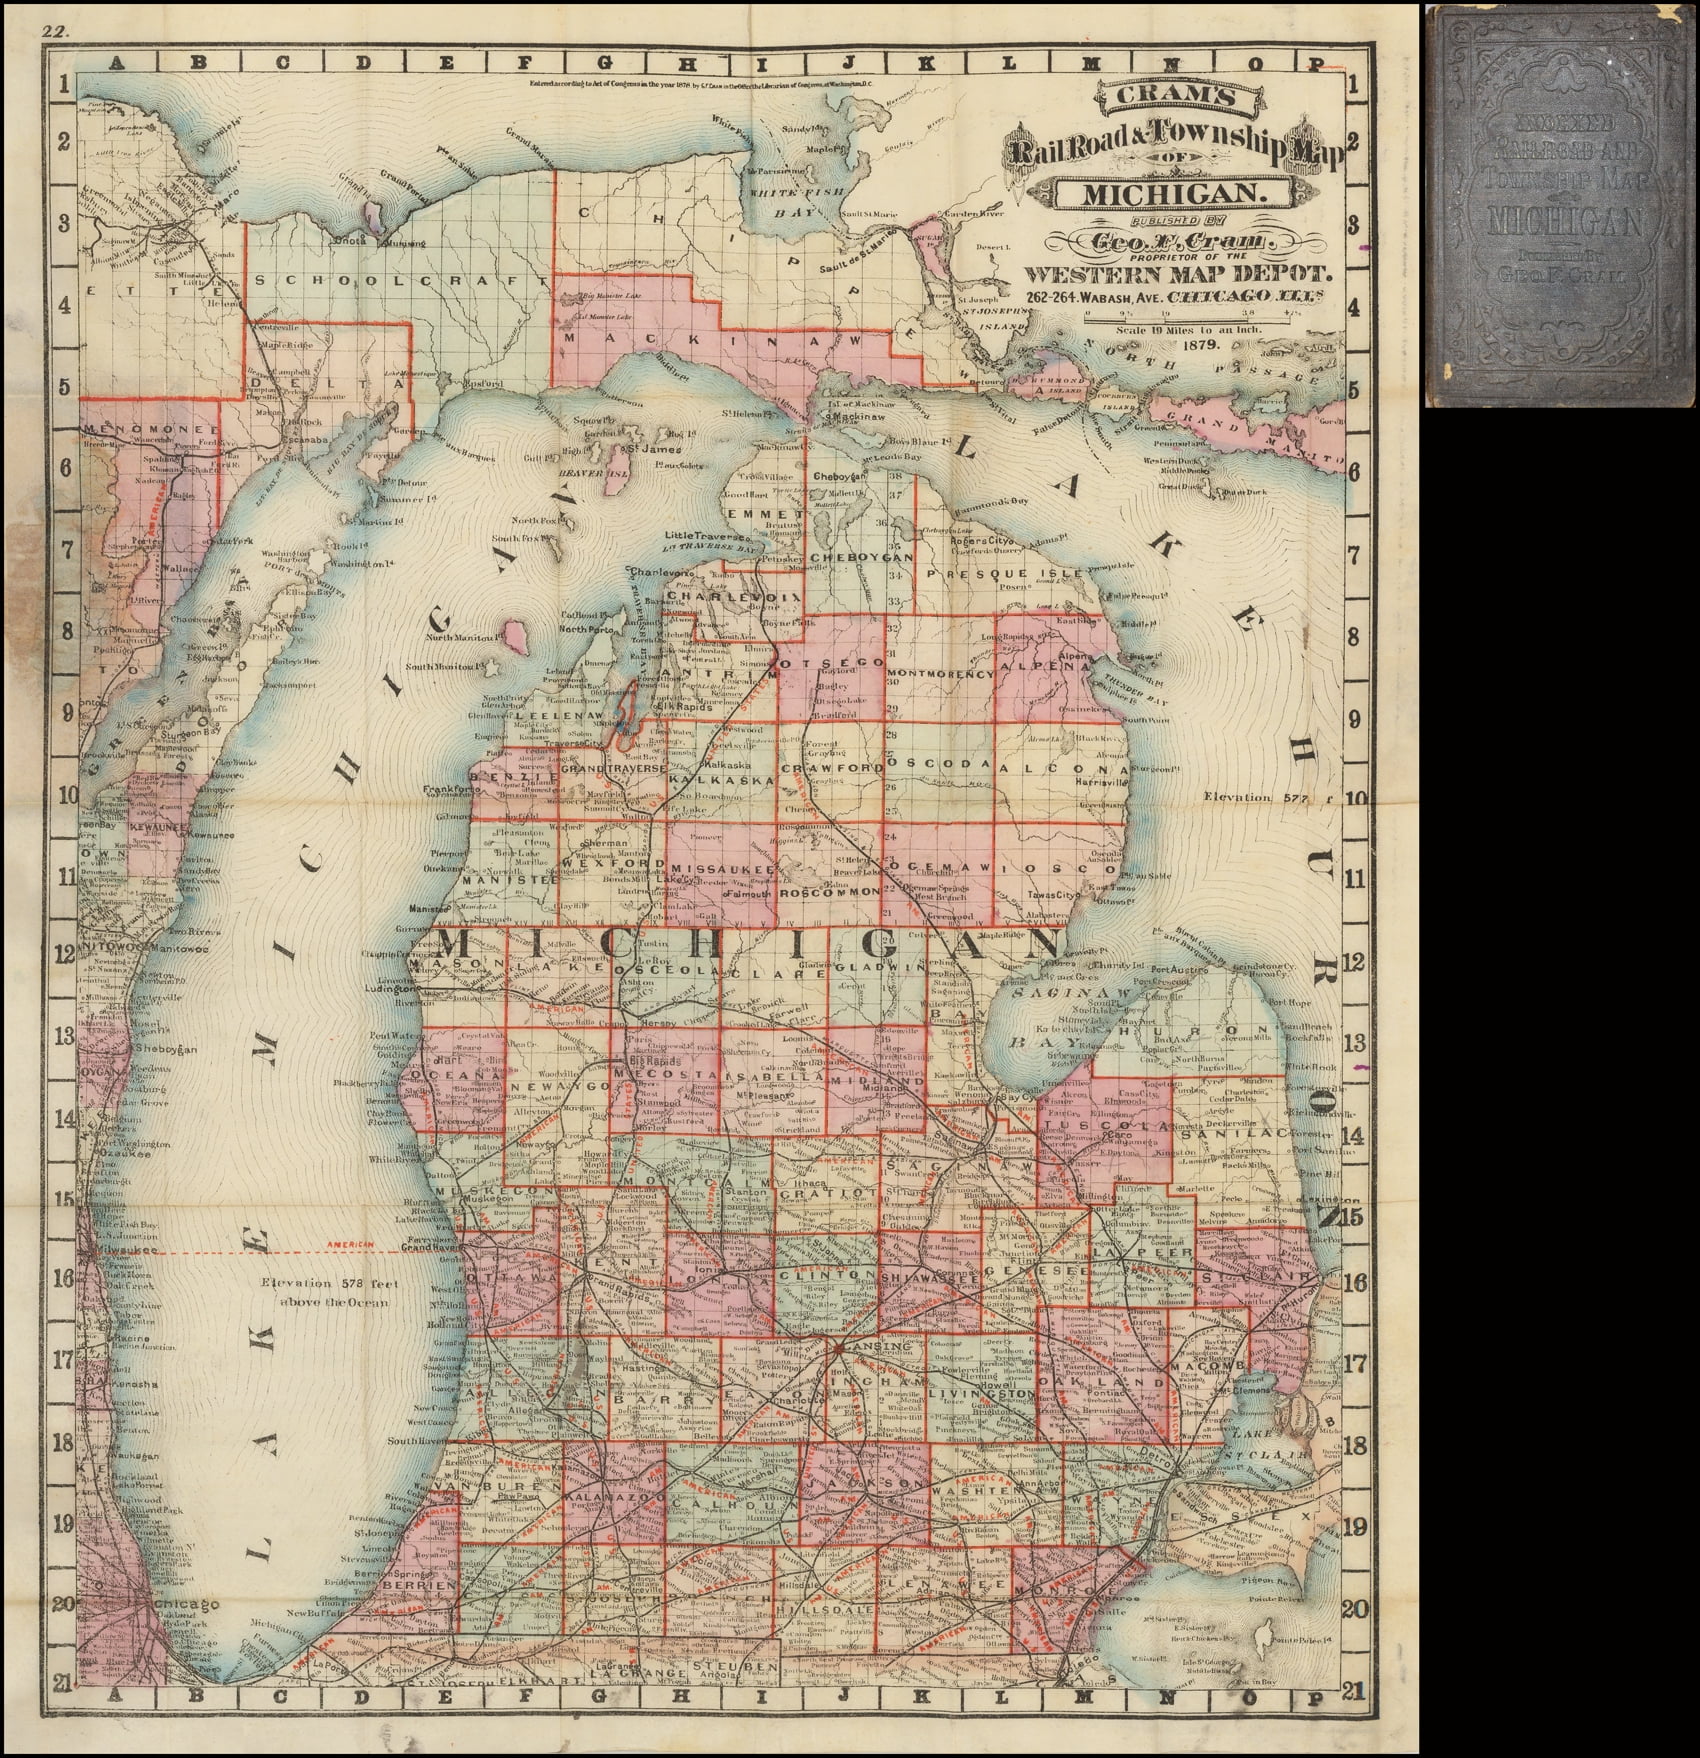 Laminated Poster Cram S Rail Road Township Map Of Michigan Published By Geo F Cram Proprietor Of The Western Map Depotaƒa A A Sa A A 1879 Poster Print X 30 Walmart Com